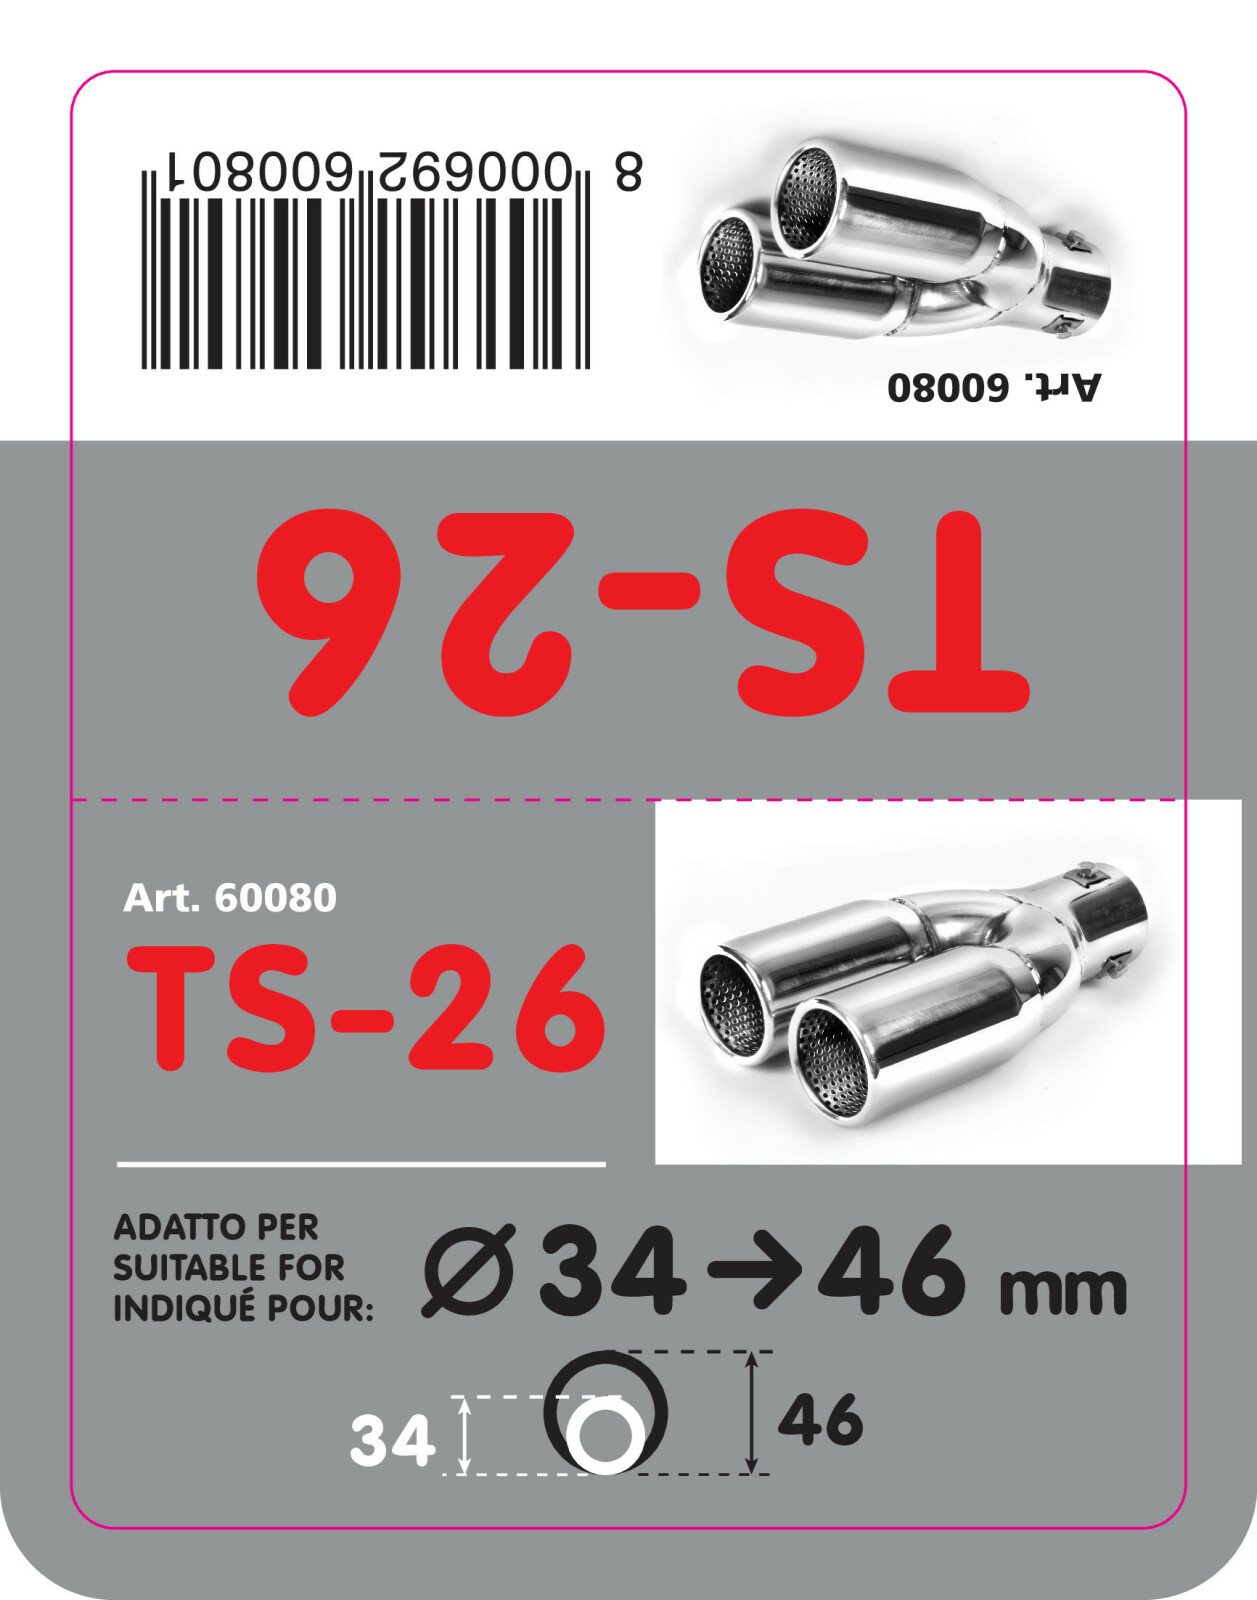 TS-26, Stainless steel exhaust blowpipe thumb